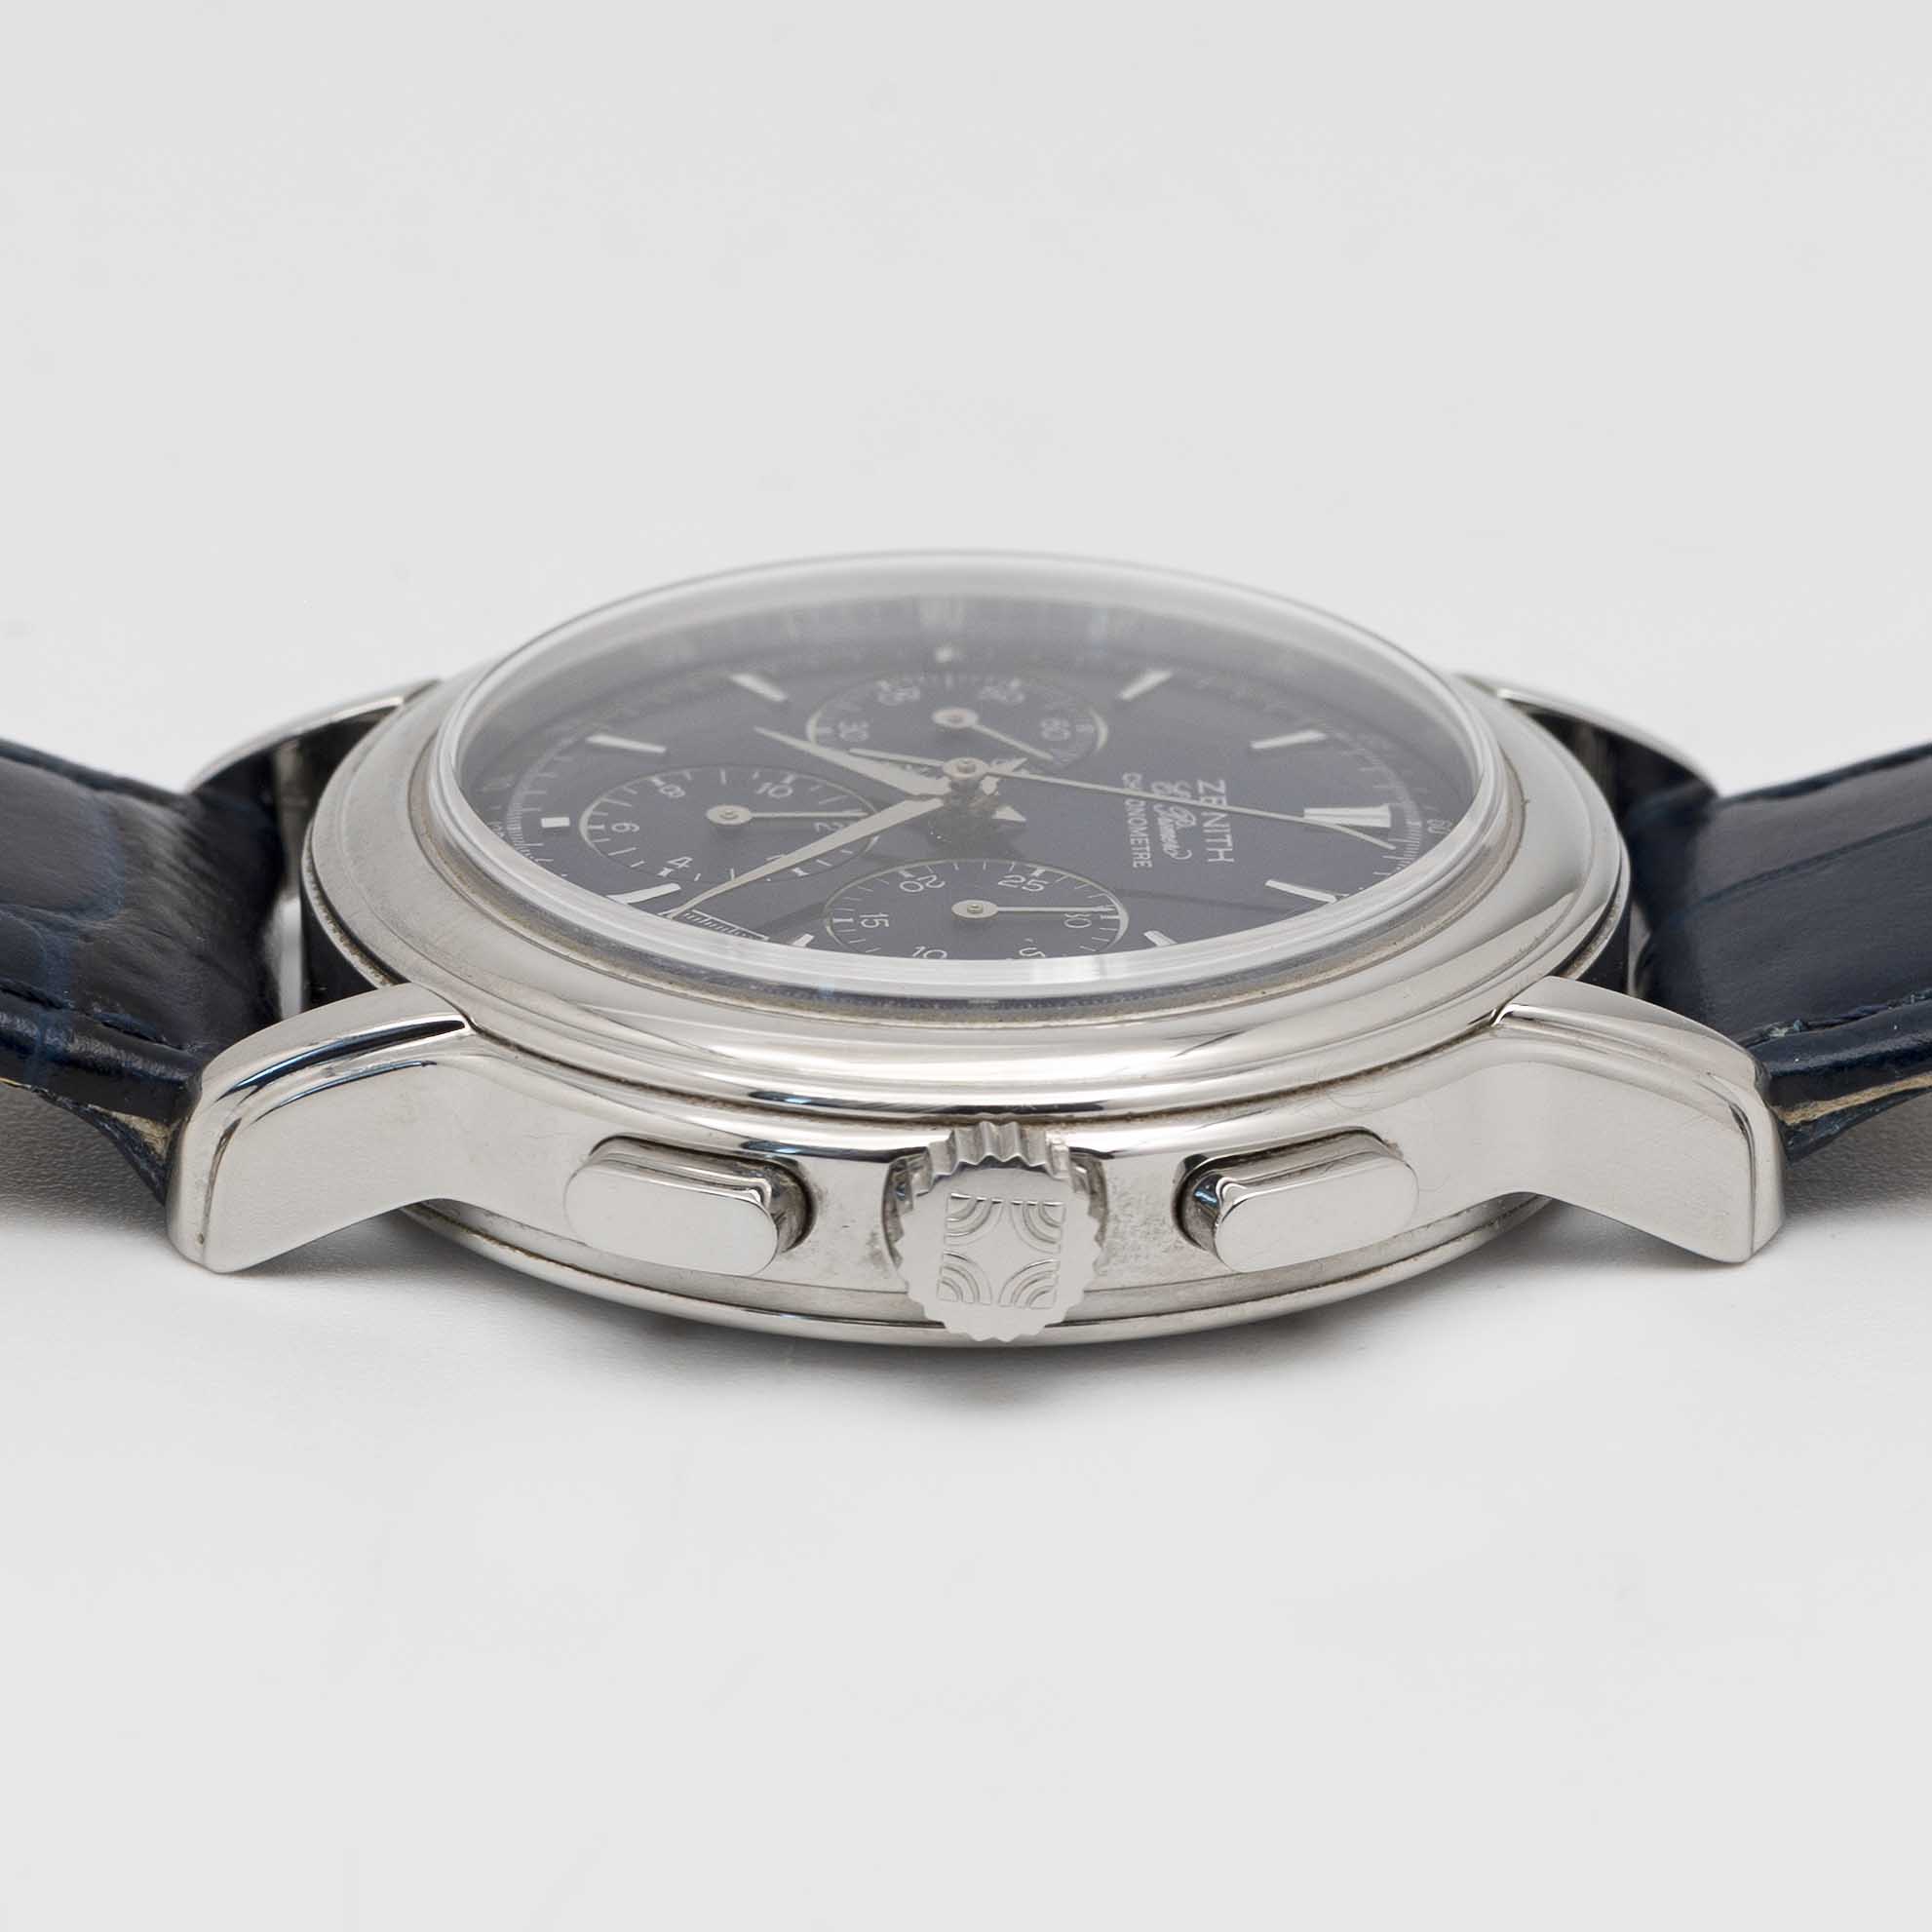 A GENTLEMAN'S STAINLESS STEEL ZENITH EL PRIMERO CHRONOMASTER CHRONOGRAPH WRIST WATCH DATED 1997, - Image 7 of 8